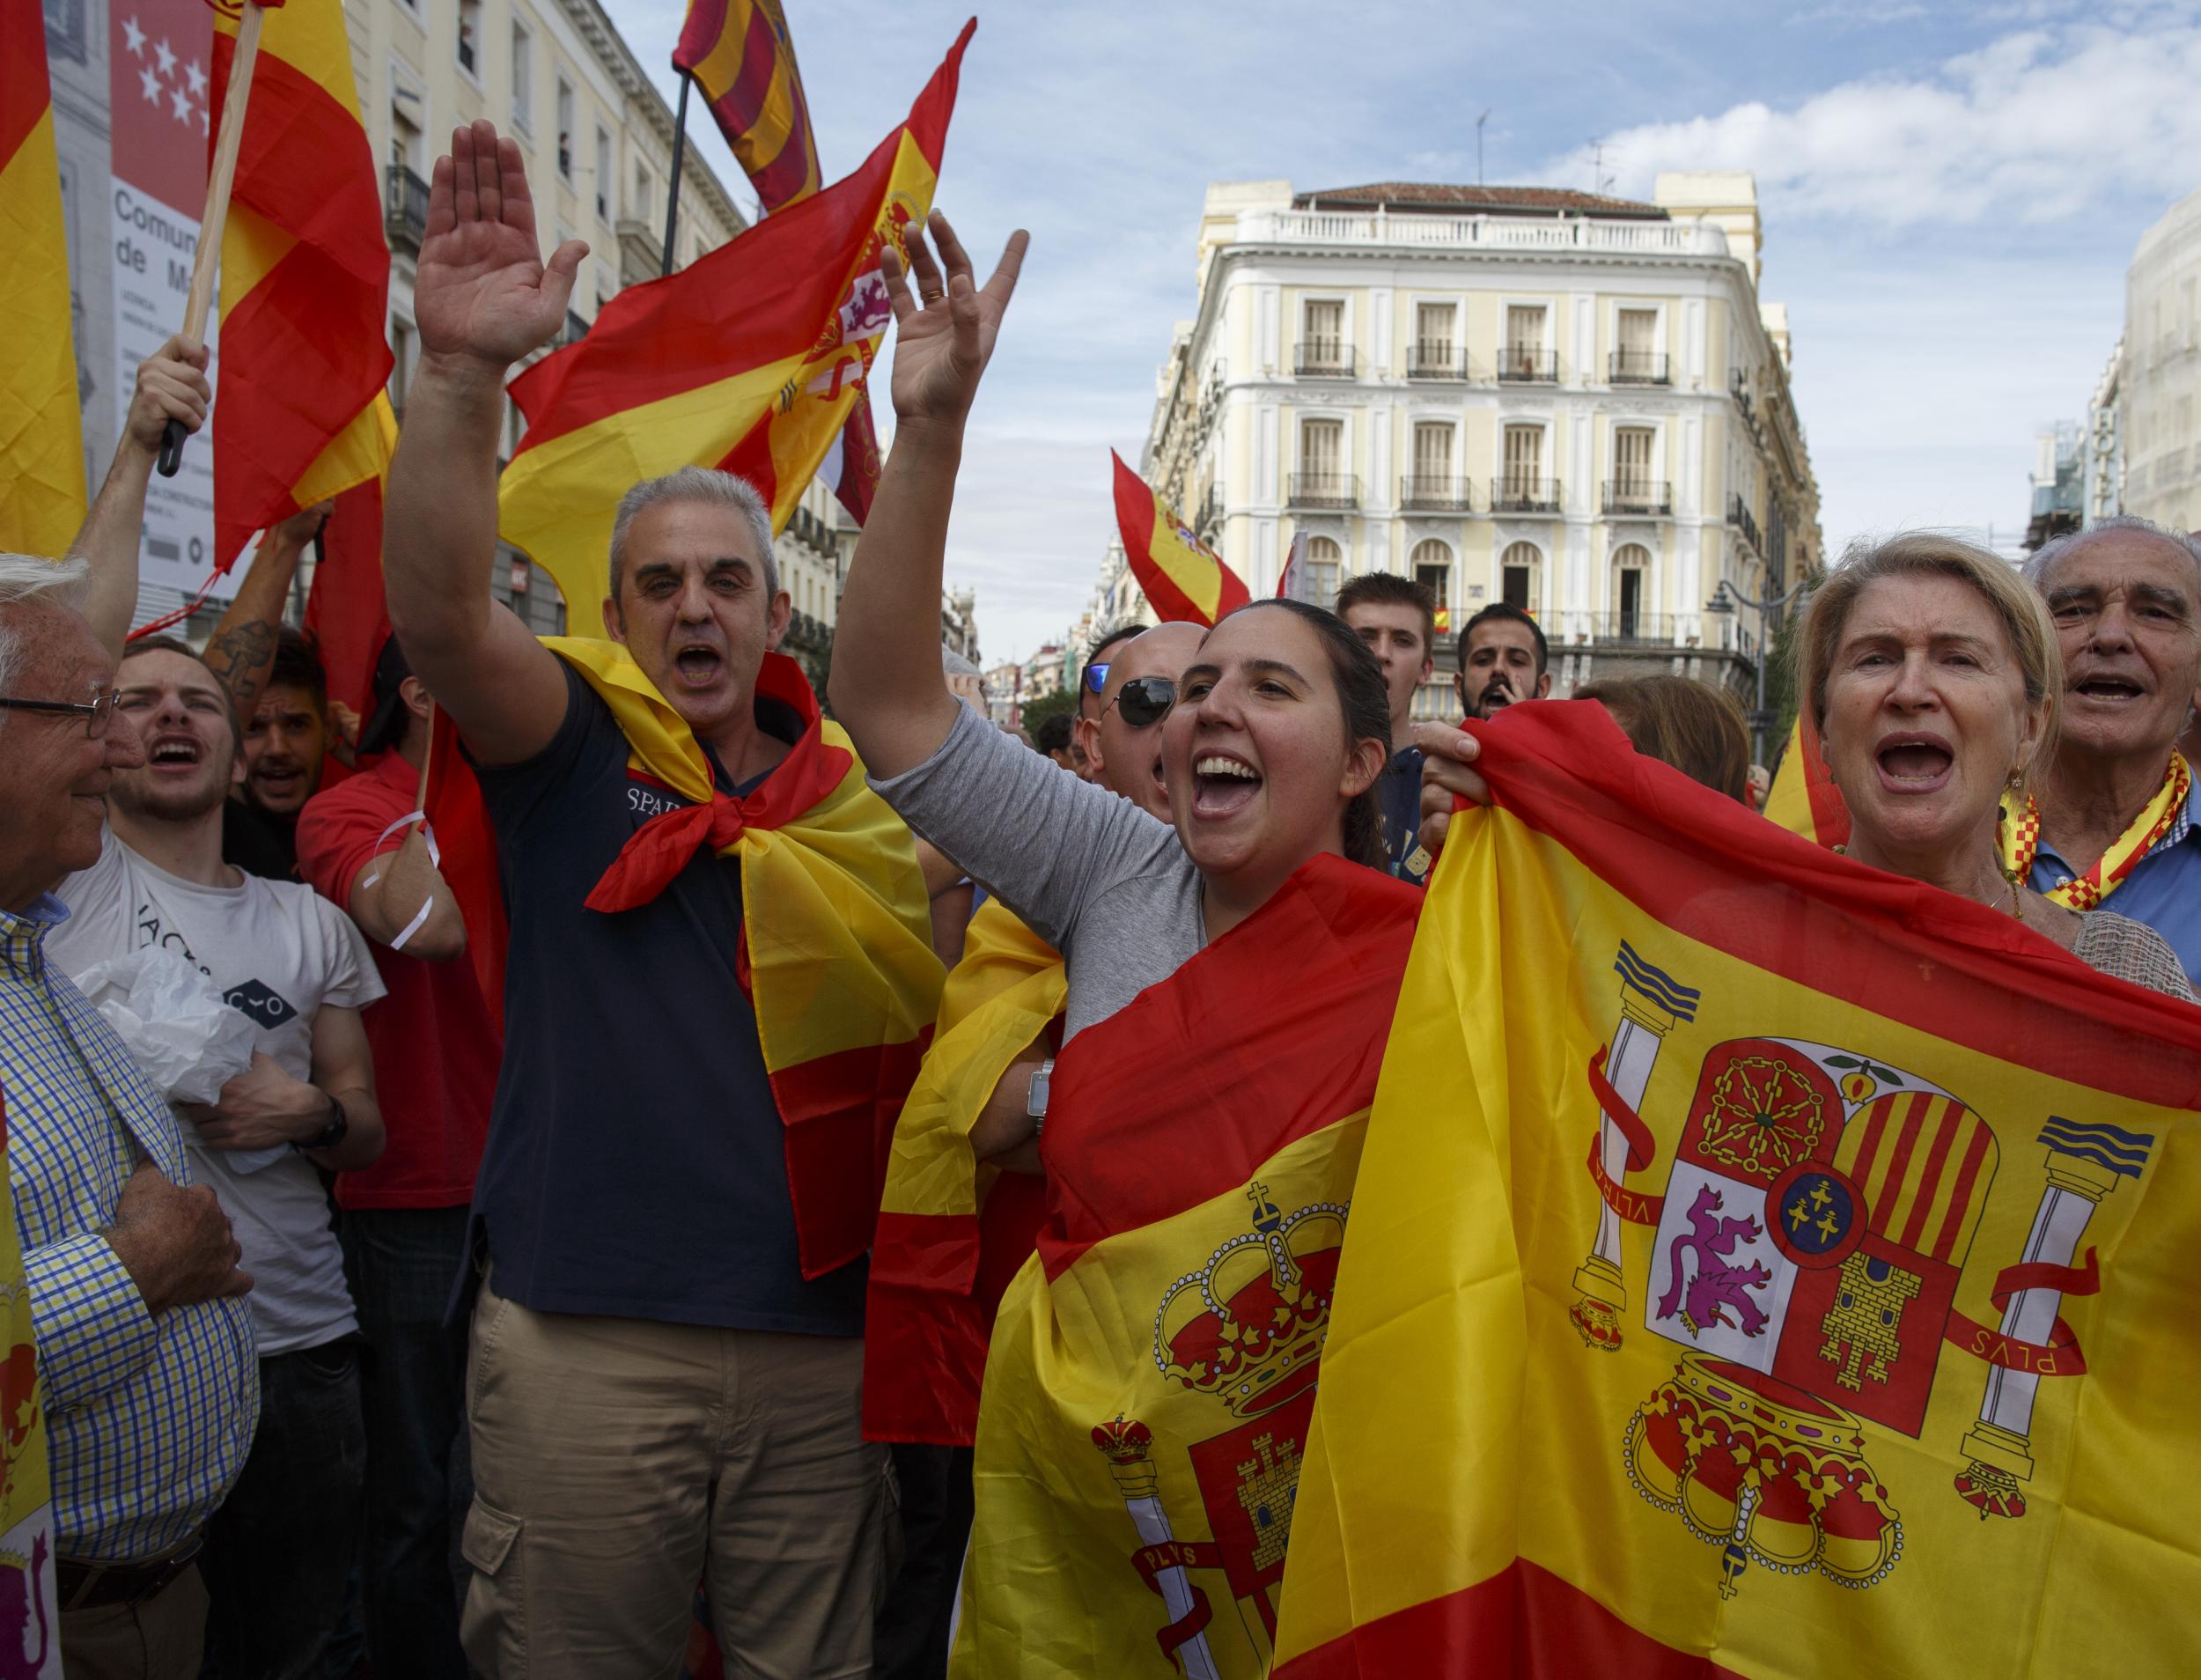 Anti-separatist demonstrators hold Spanish flags and shout slogans as one does a fascist salute during a protest in support of Spain's unity